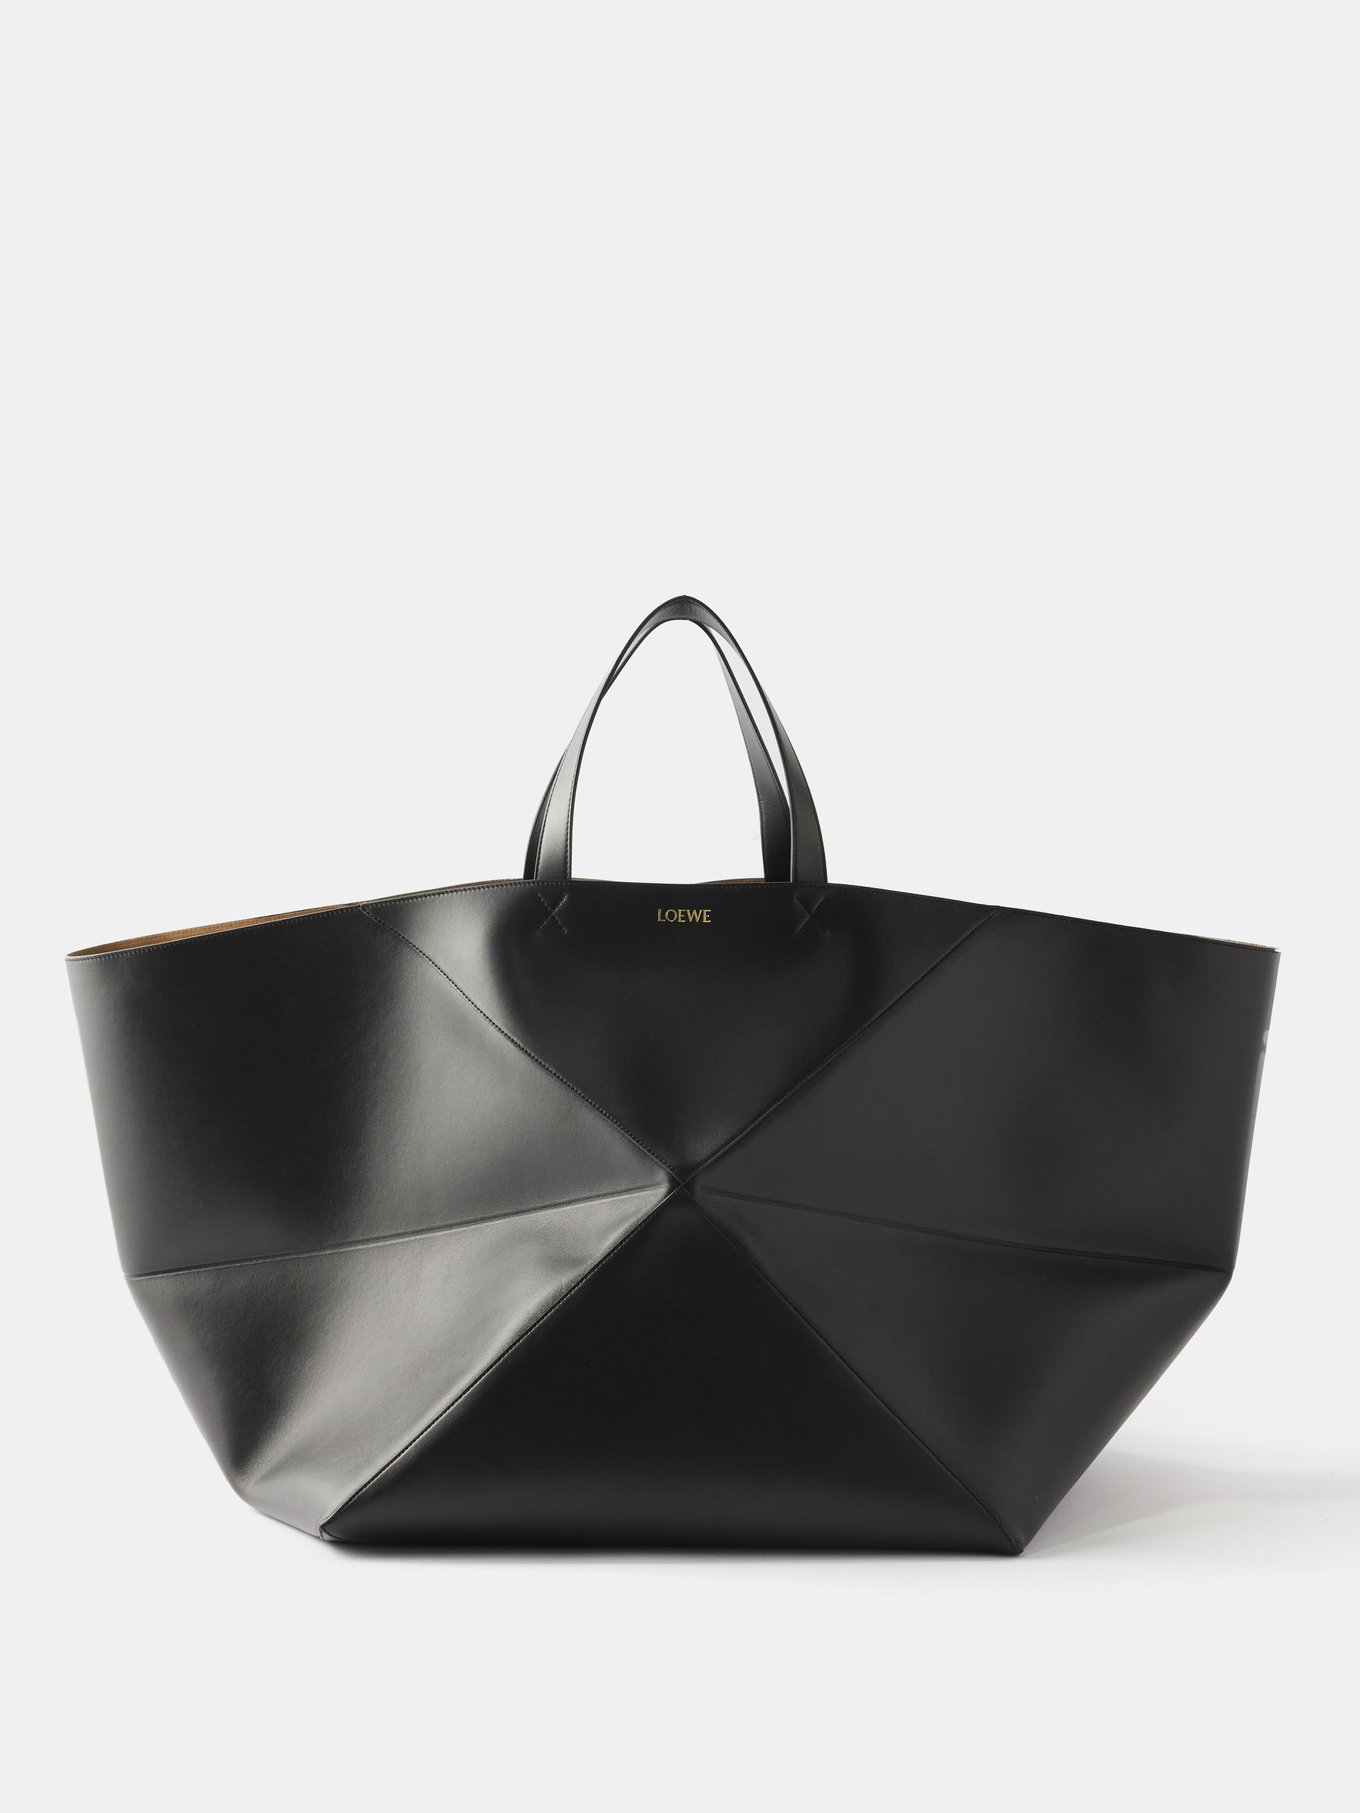 Loewe Puzzle Fold Large Leather Tote Bag in Black